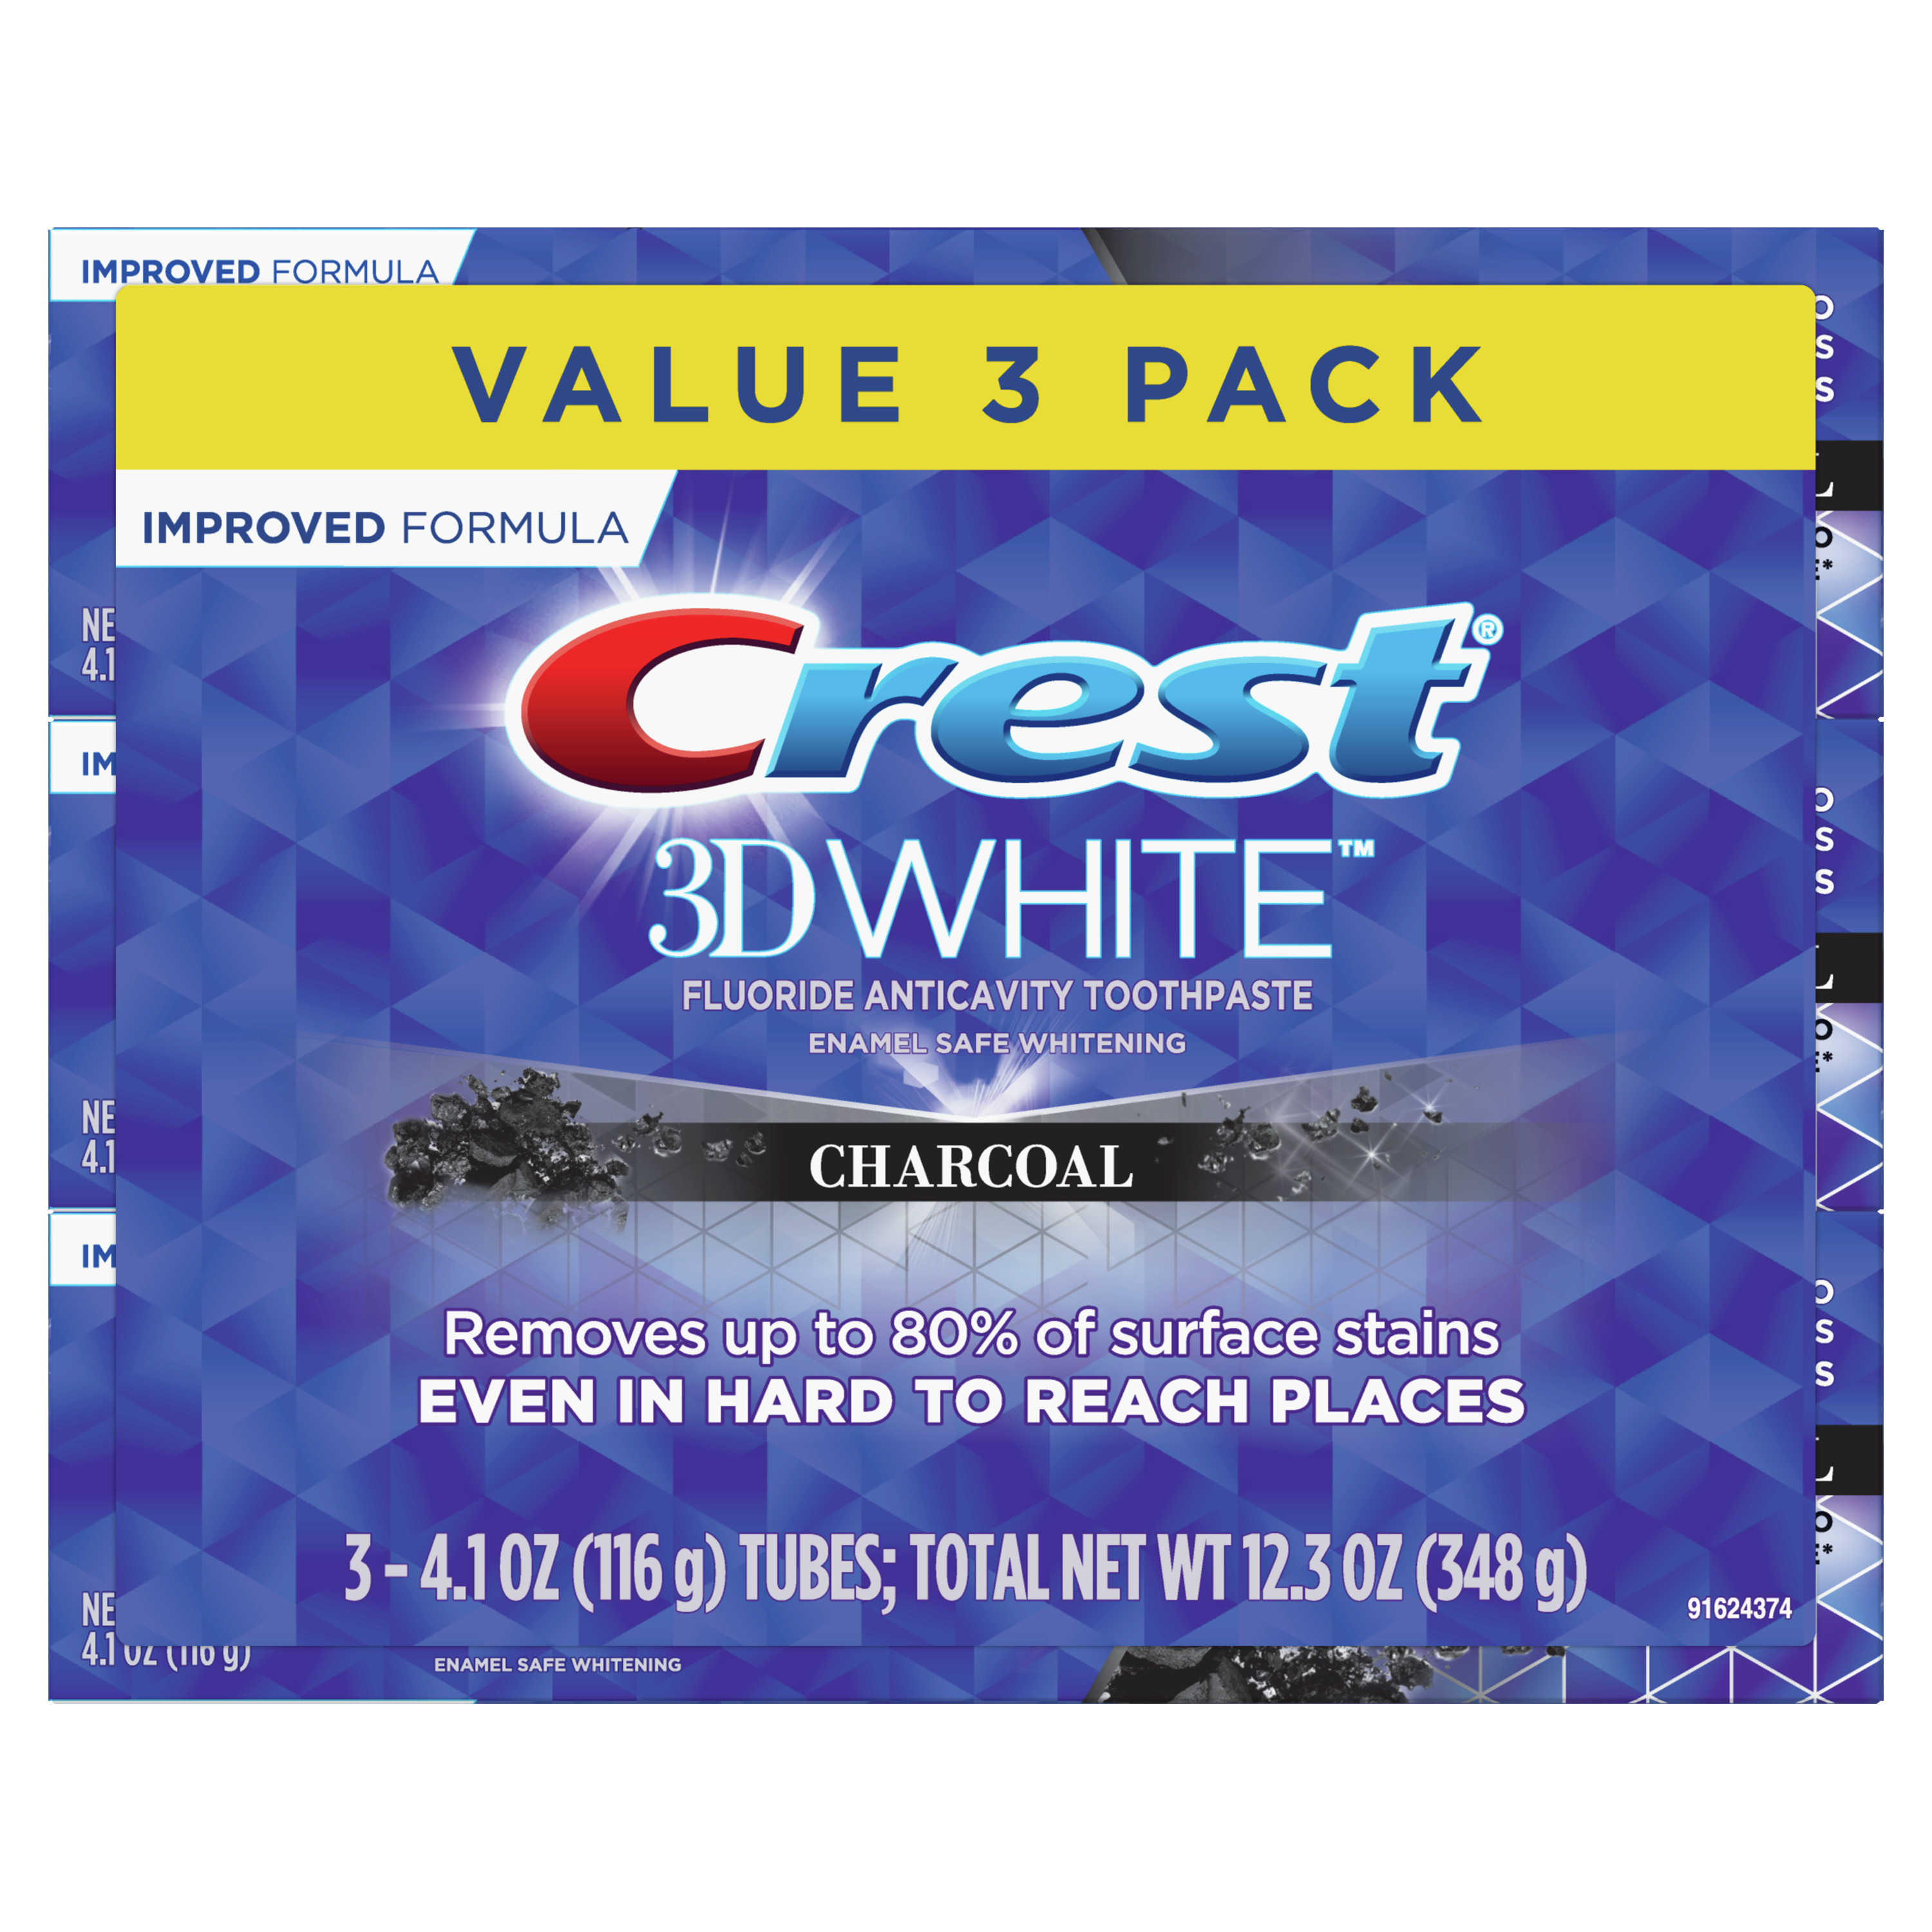 Crest 3D White, Charcoal Whitening Toothpaste, 4.1 oz, Pack of 3 - image 1 of 5